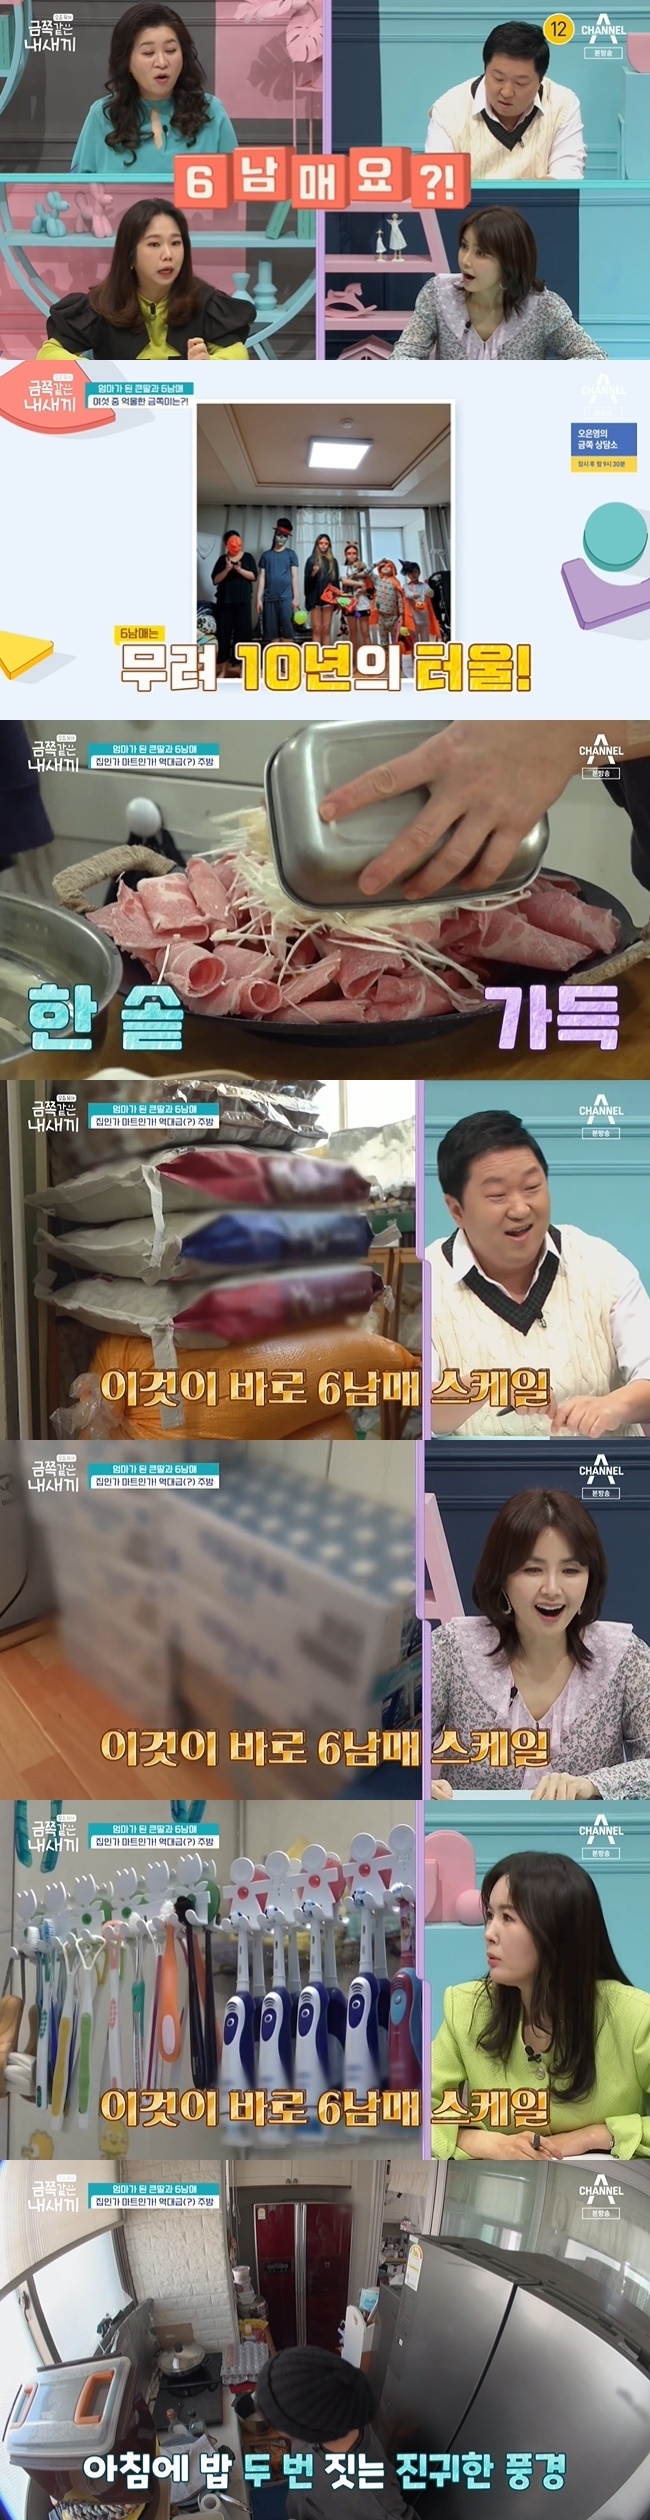 From Shin Ae-ra to Hong Hyon-hee, I was surprised by the 6Brother and Sister Parenting scale.On March 11, Channel A Parenting - My Little Like the Gold featured a single mother who raised 6 Brother and Sister.On this day, the studio featured a single mother and first daughter who raised 6 Brother and Sister.Jang Youngran was surprised that if you were 6 Brother and Sister, your mother would have lived with pregnancy, and Jeong Hyeong-don corrected What is pregnancy?The mother, who is working as a fitness model, said that she was 18 years old and her youngest was 8 years old.In the daily life that was released as a video, my mother came home to clean the workplace and prepare 6 Brother and Sister breakfast.Starting in the morning with a pan-filled meat dish, one side of the wall was filled with rice bags.Jeong Hyeong-don was surprised to say that it was a rice house, and when a full water bottle and toothbrush were released, Shin Ae-ra was embarrassed as a mother.Jang Youngran also worried about her mother, How can you handle this?